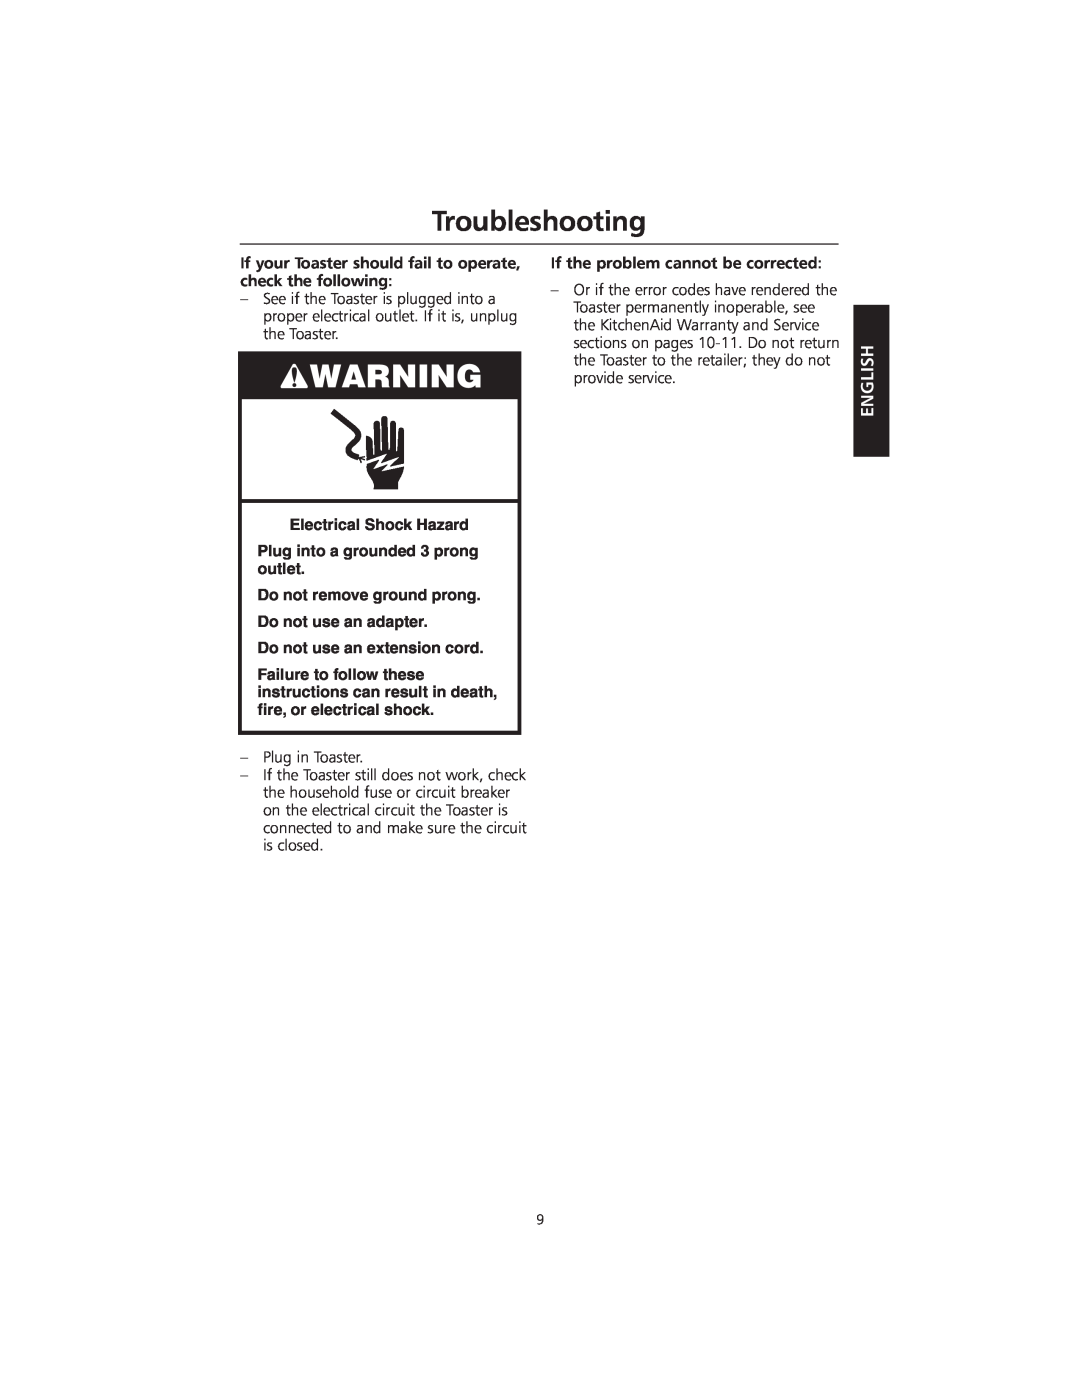 KitchenAid KMTT400 manual Troubleshooting, English, Electrical Shock Hazard, Plug into a grounded 3 prong outlet 